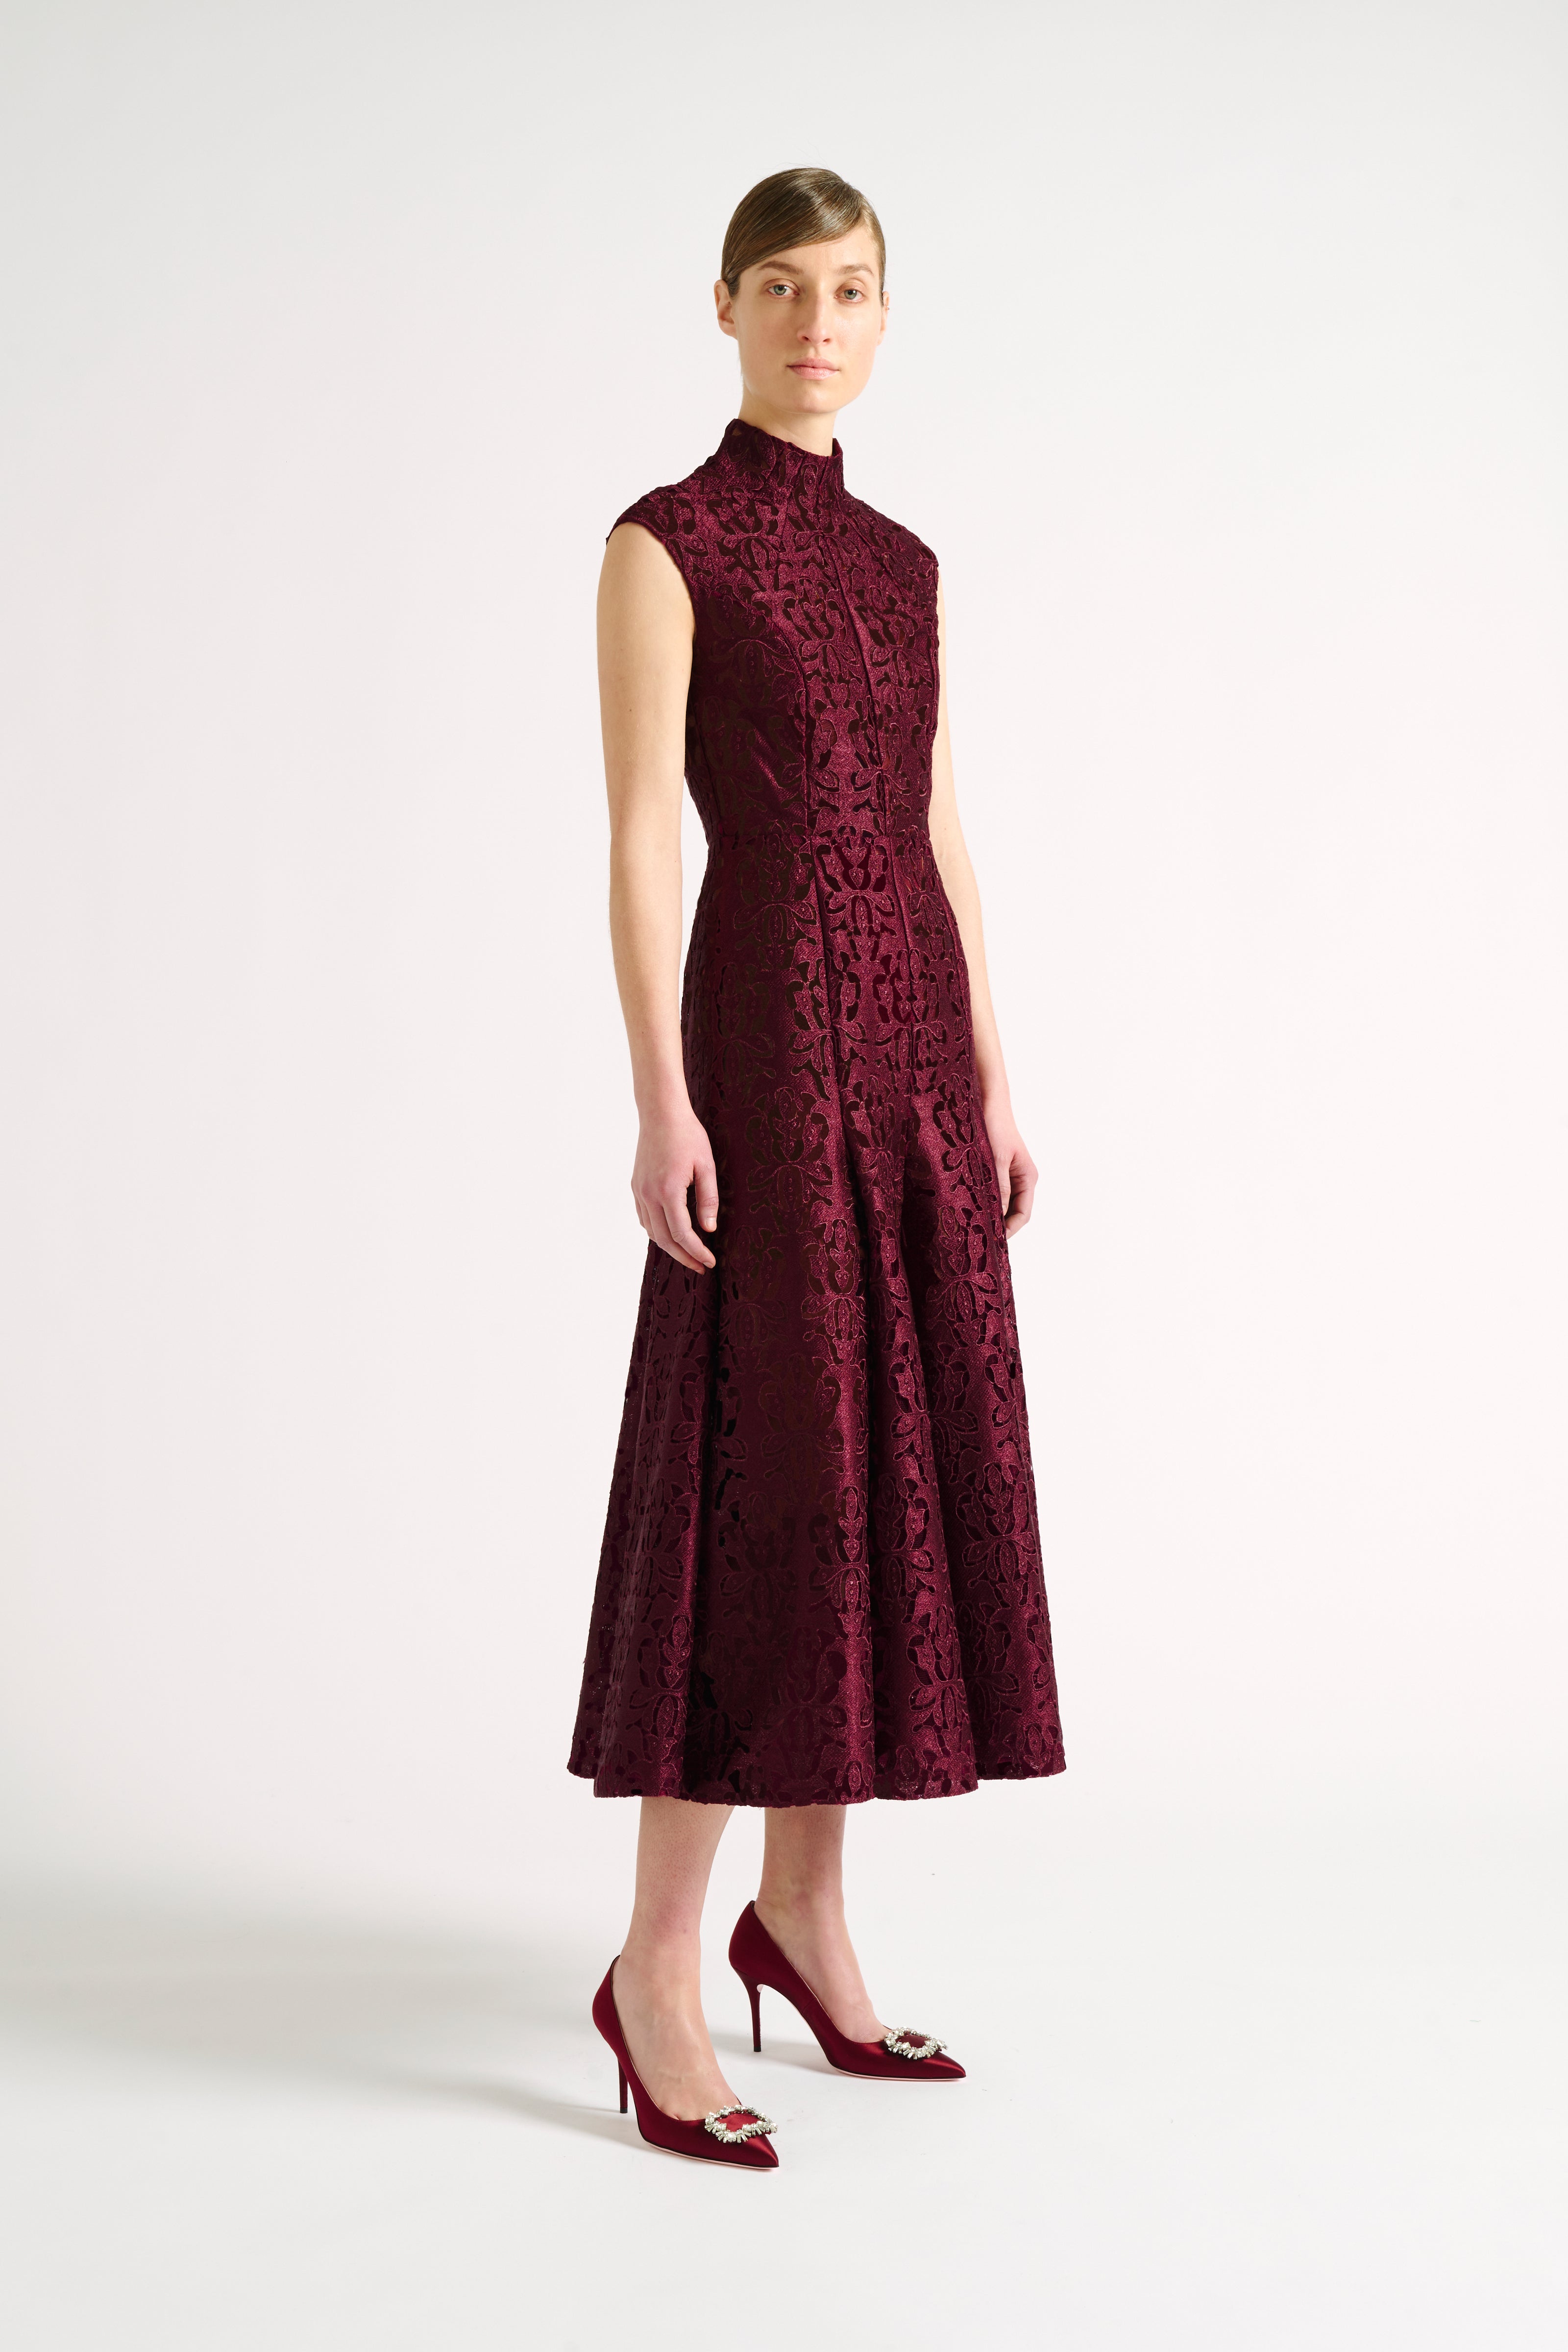 Charly Dress | Burgundy Lace High Neck Fit and Flare Dress | Emilia ...